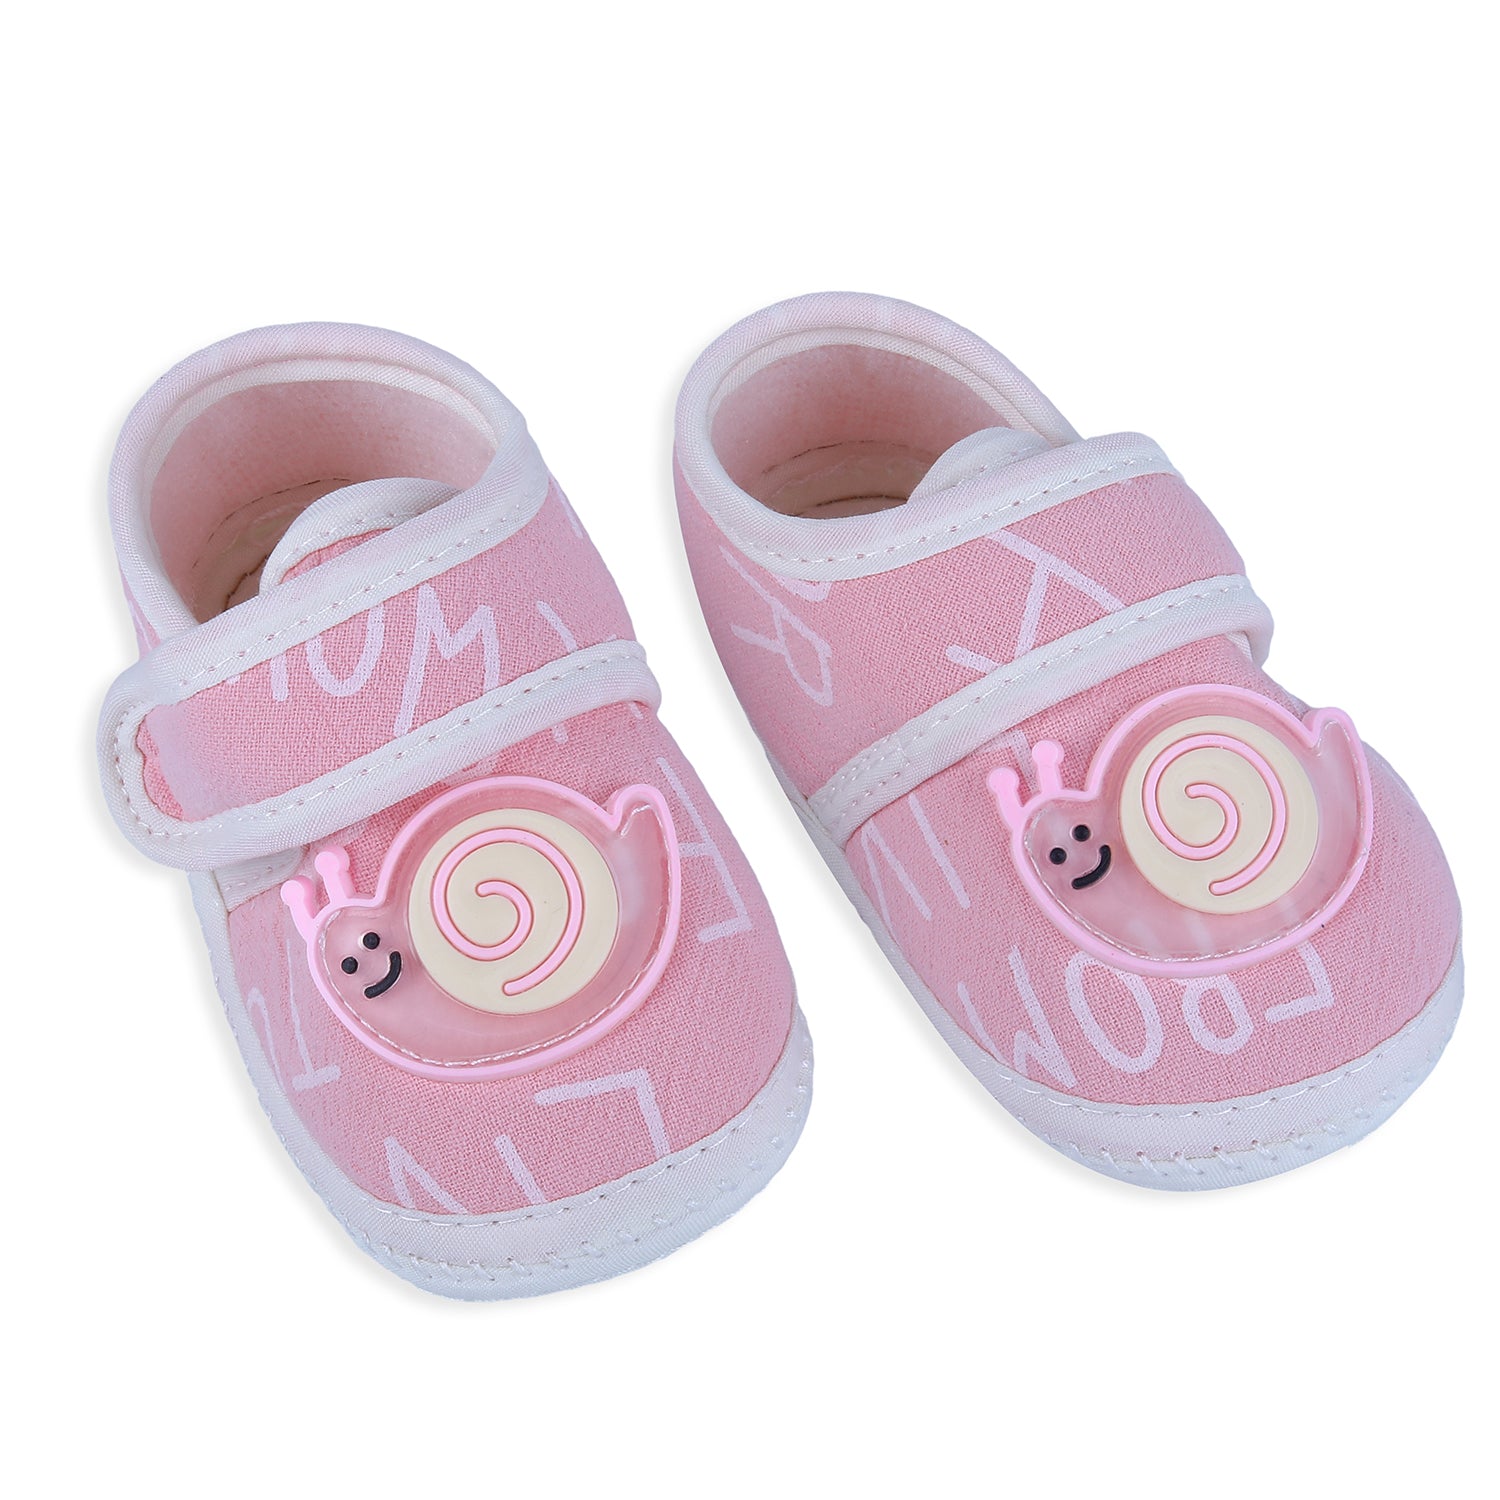 Baby Moo Snail Applique Velcro Strap Non-slip Kids Booties - Pink - Baby Moo